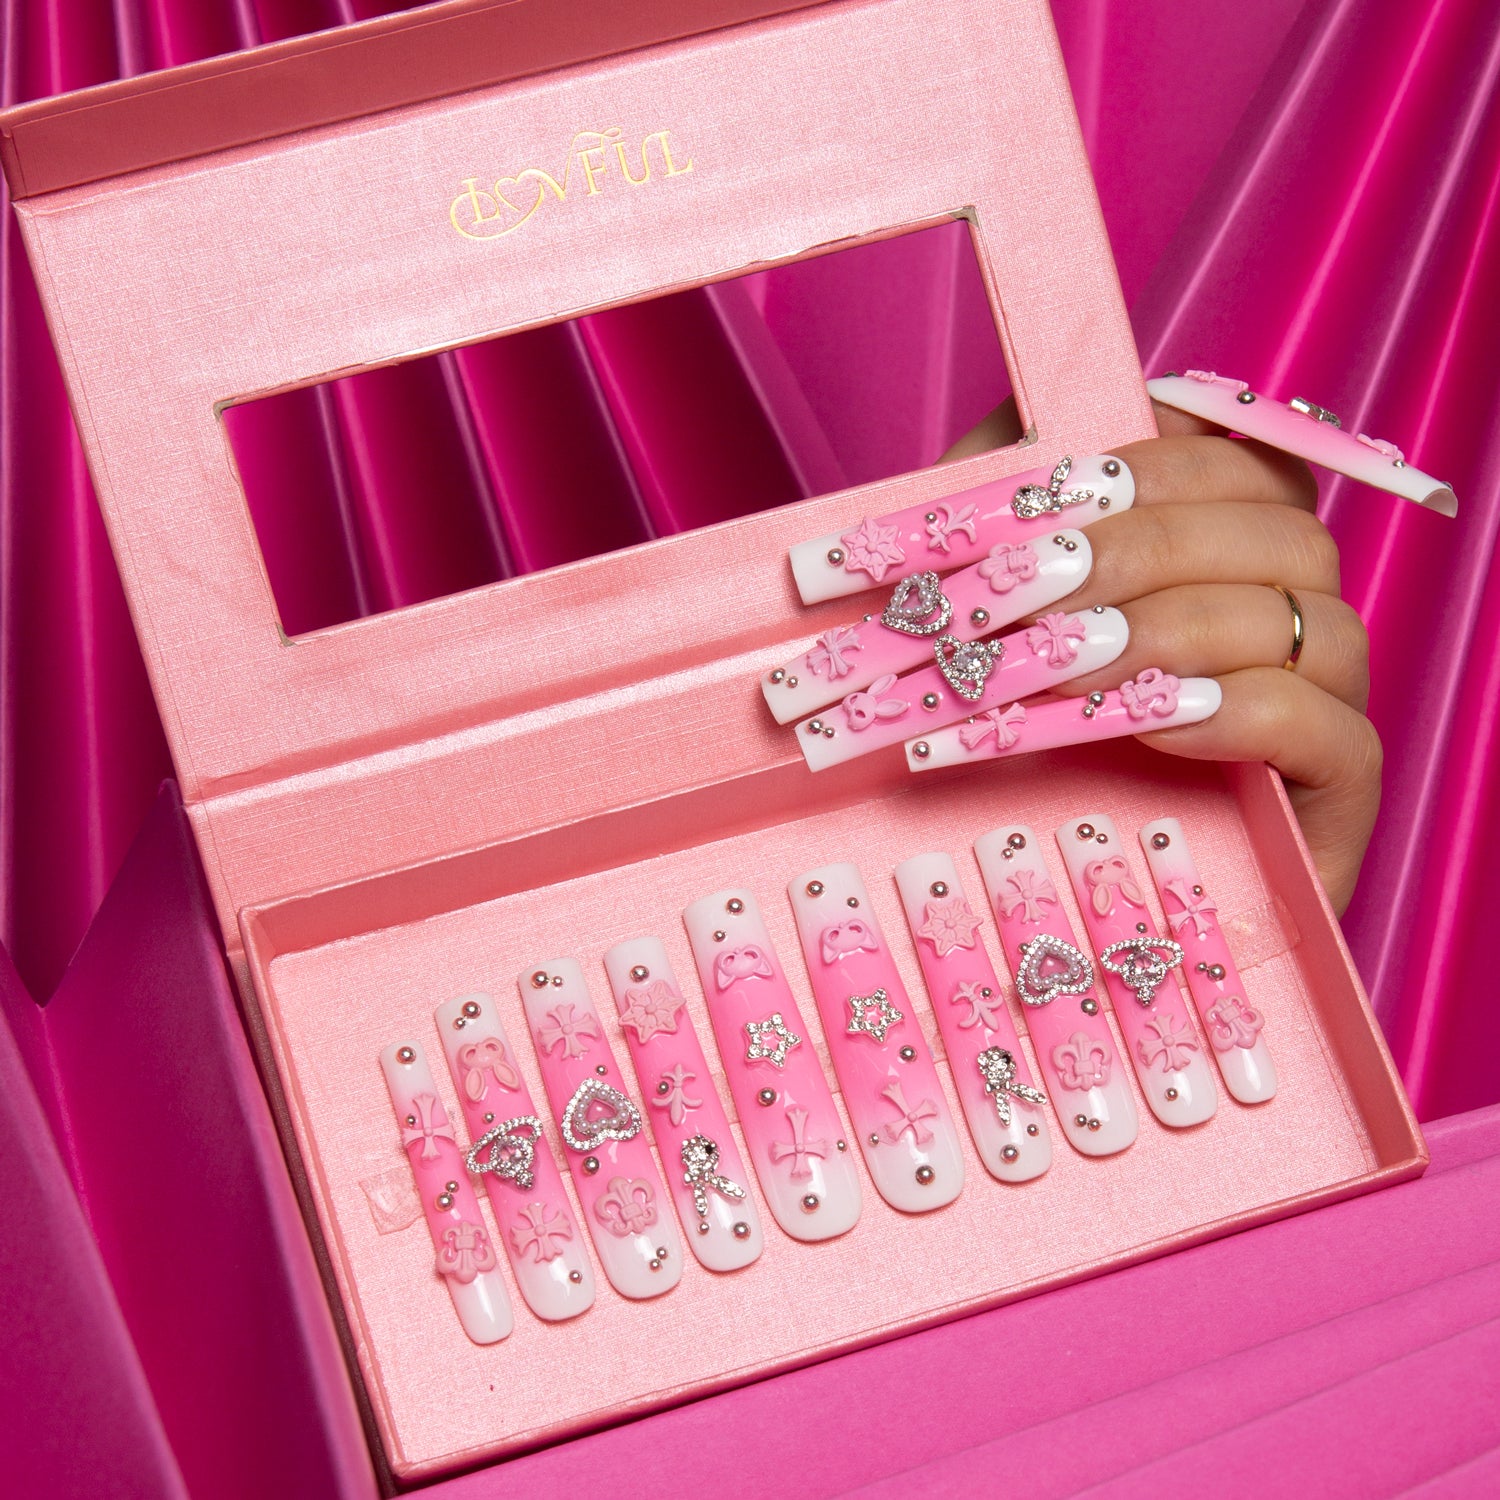 Press-on nails from Lovful's 'Pink Bliss Blush' collection in a pink box. Nails have a pink gradient style with heart shapes, pink crosses, cat designs, and planet motifs. A hand models the nails.